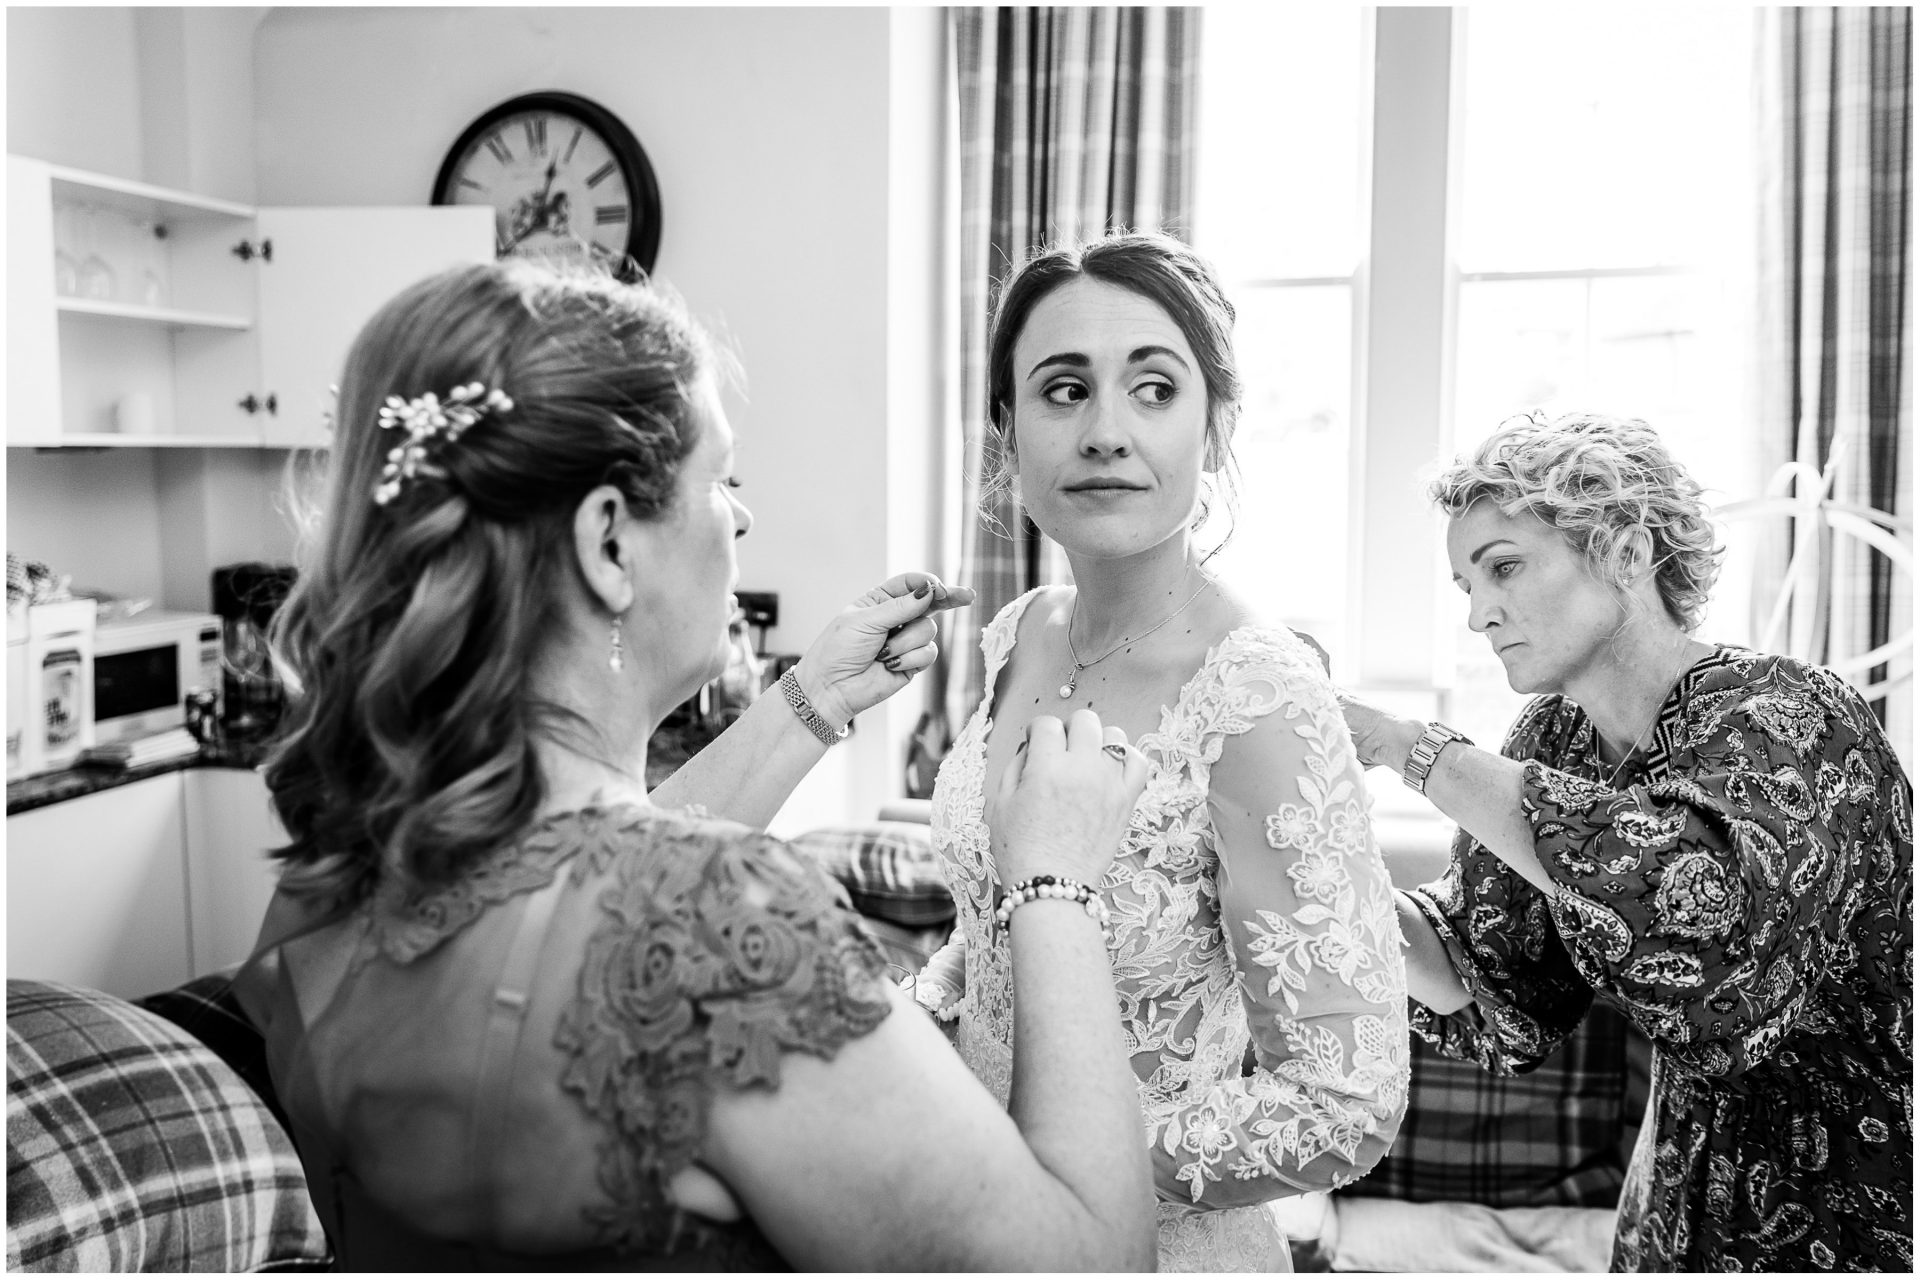 The bride gets ready - black and white photo